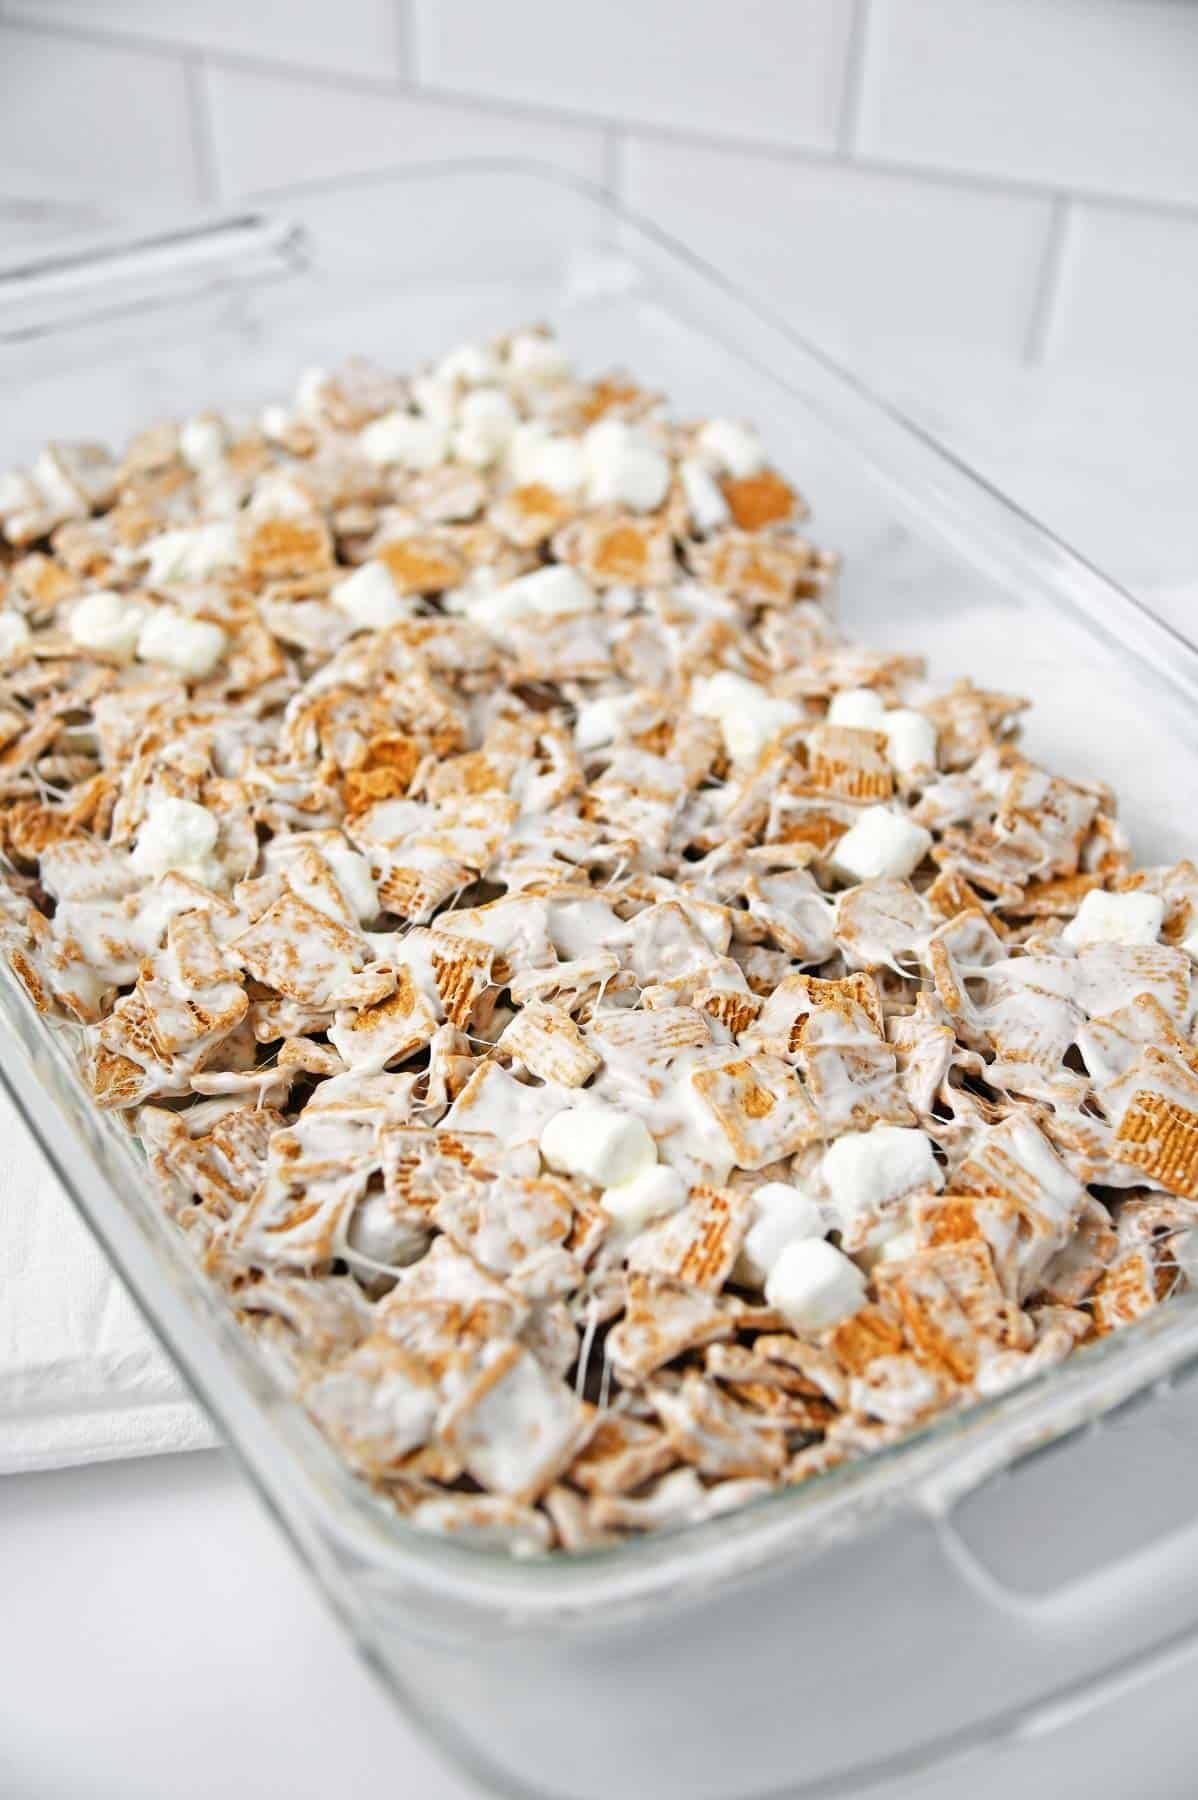 The cereal marshmallow mixture pressed evenly as an additional layer on top of the bottom layer.